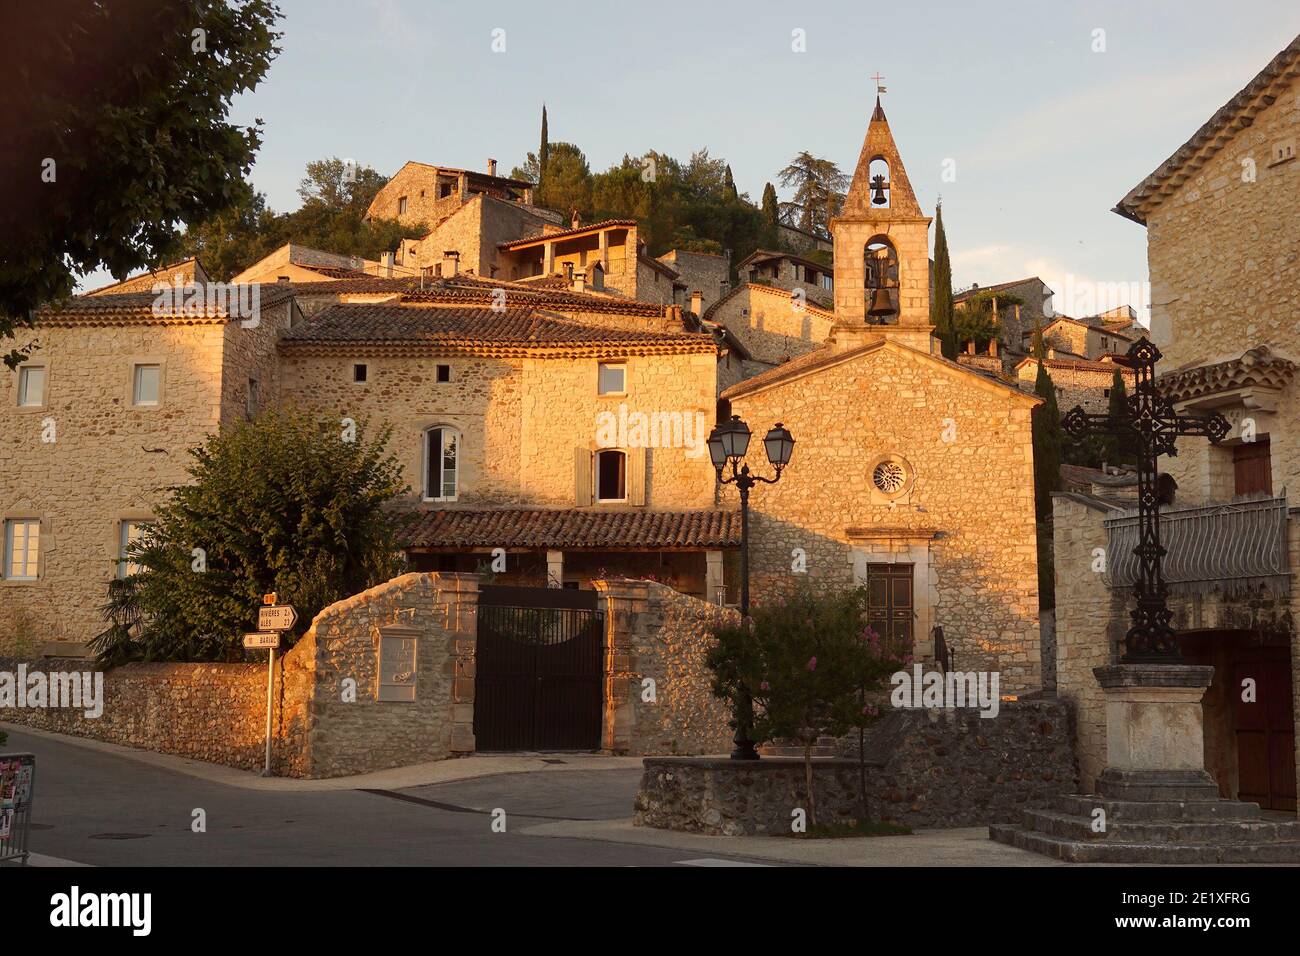 Rochegudde, a small and beautifull pittoresk village in Provincal Drome region in Southern France Stock Photo